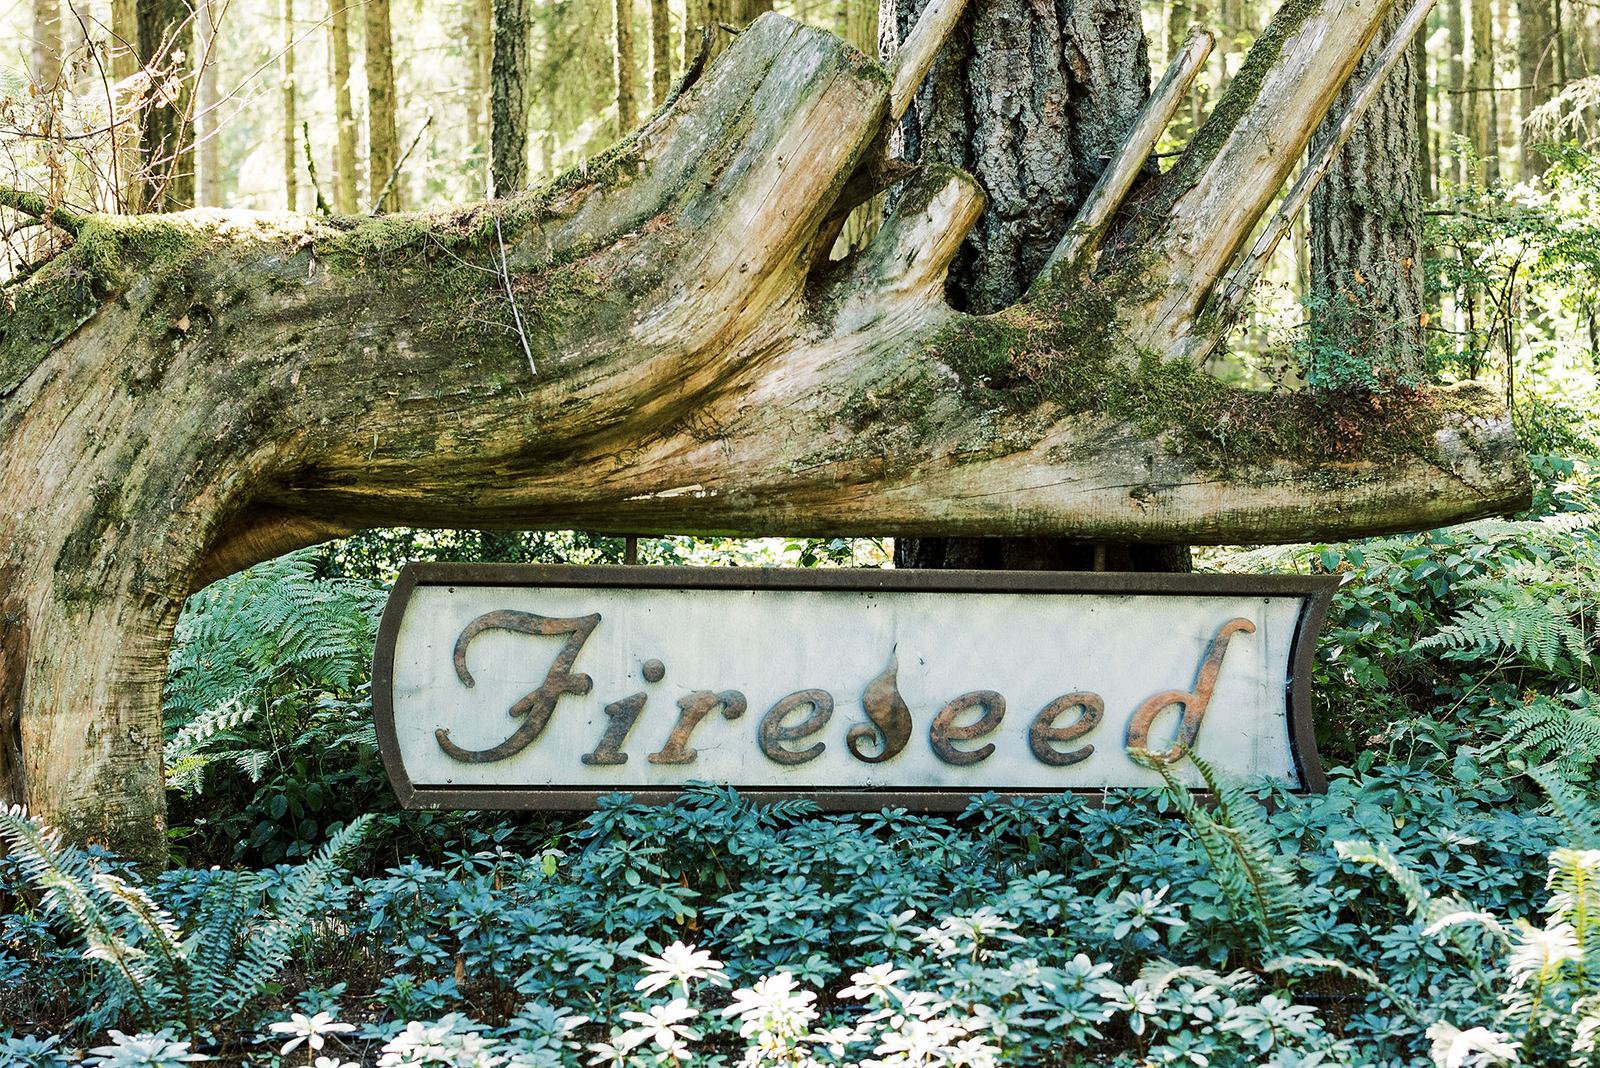 Welcome to Fireseed